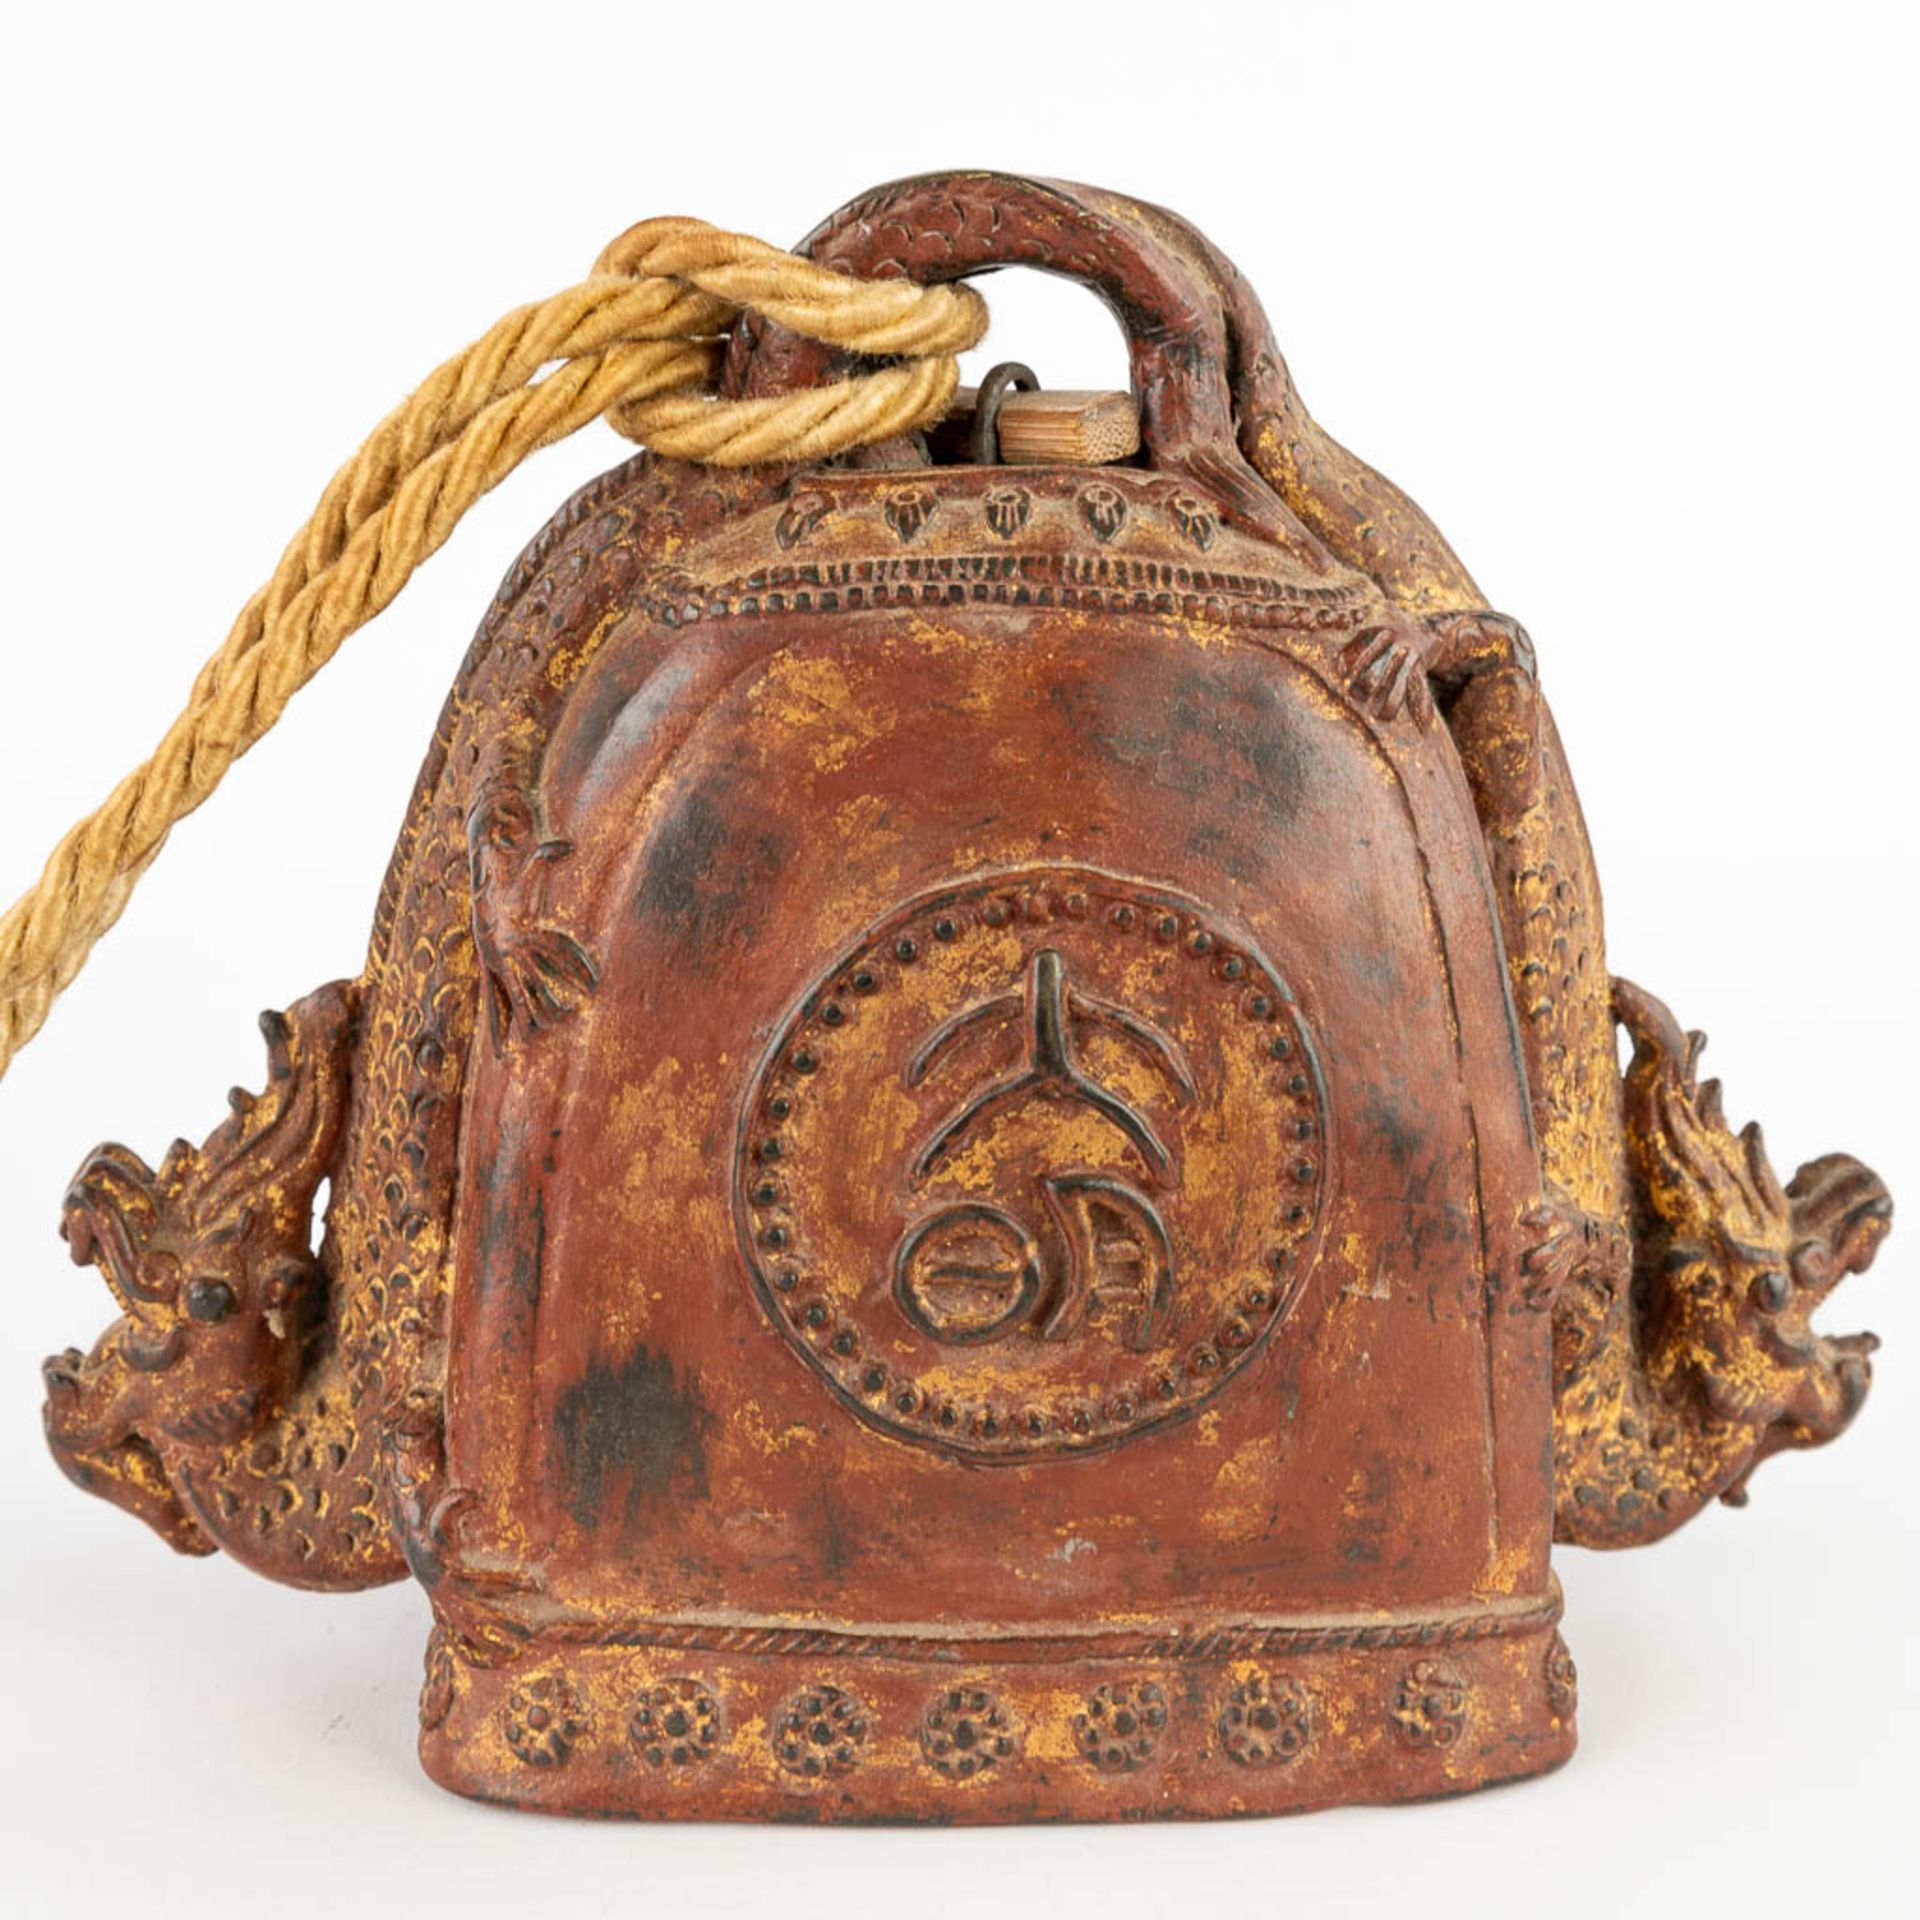 3 bells and a gong, Oriental. 19th/20th C. (L:13 x W:47 x H:55 cm) - Image 26 of 28